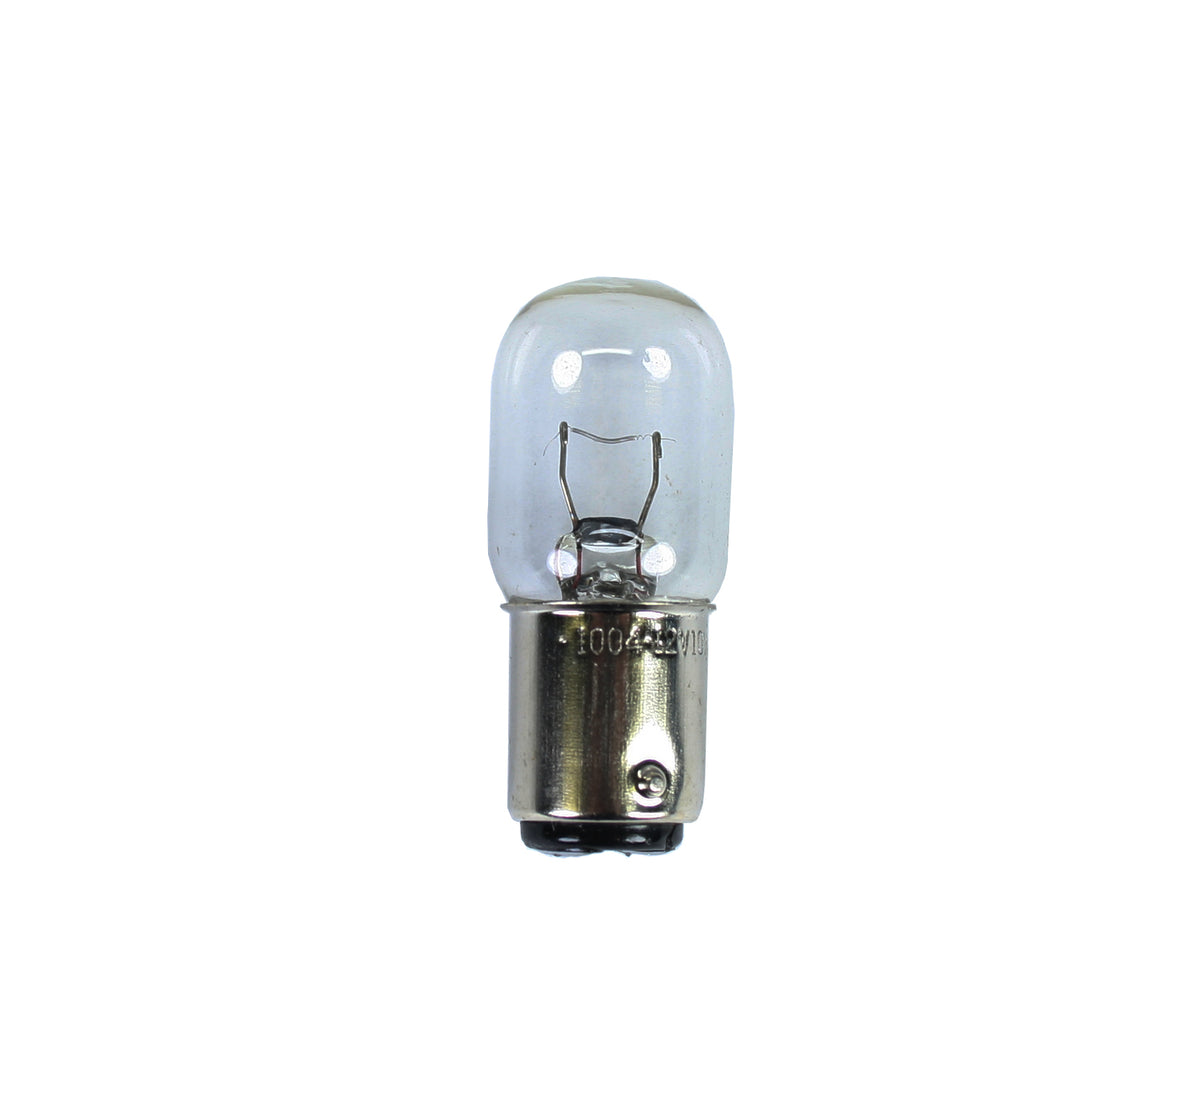 Replacement Tungsten Bulb - 800-411